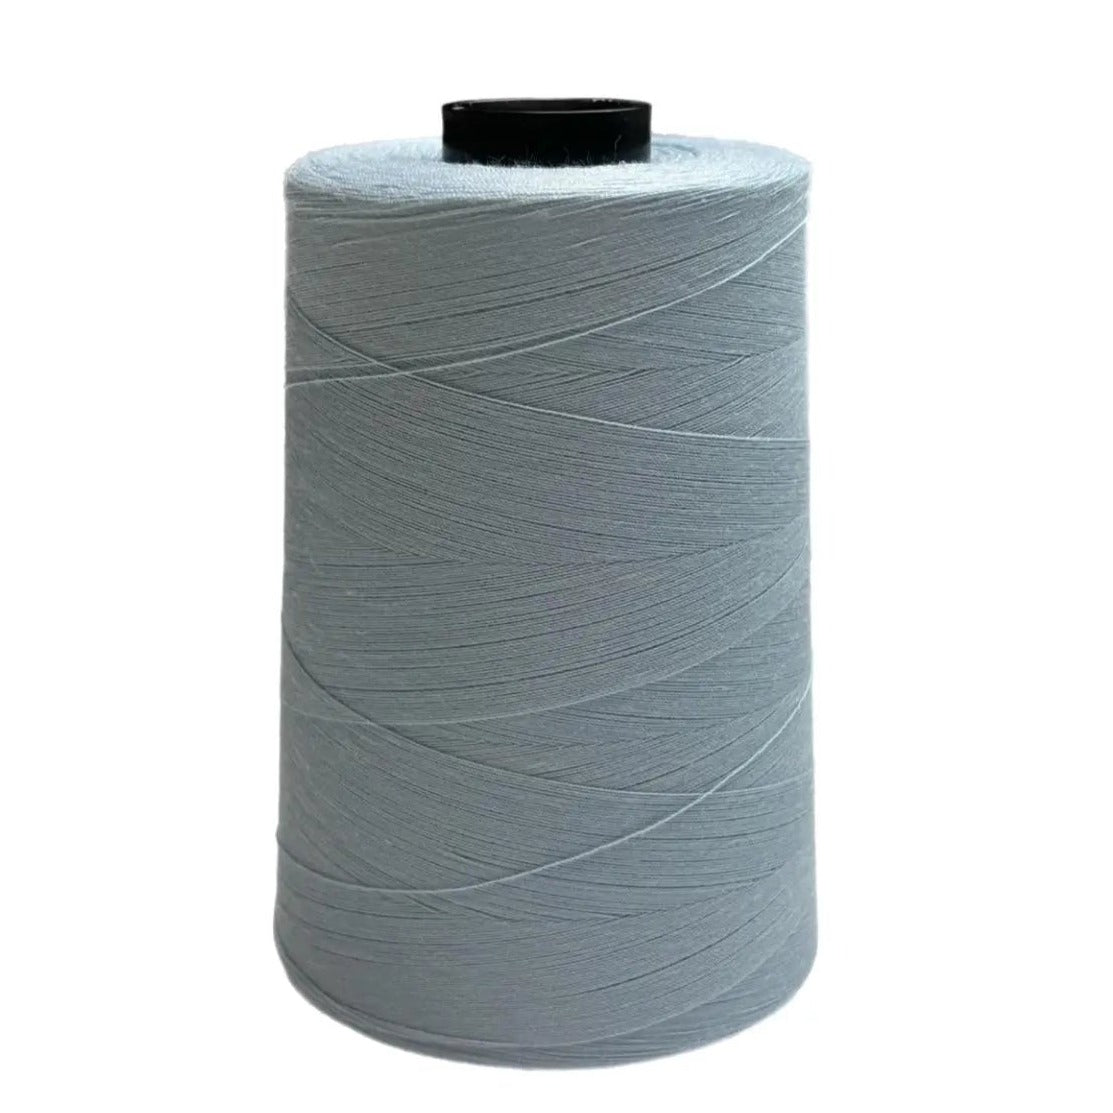 W32056 Chambray Perma Core Tex 30 Polyester Thread - Linda's Electric